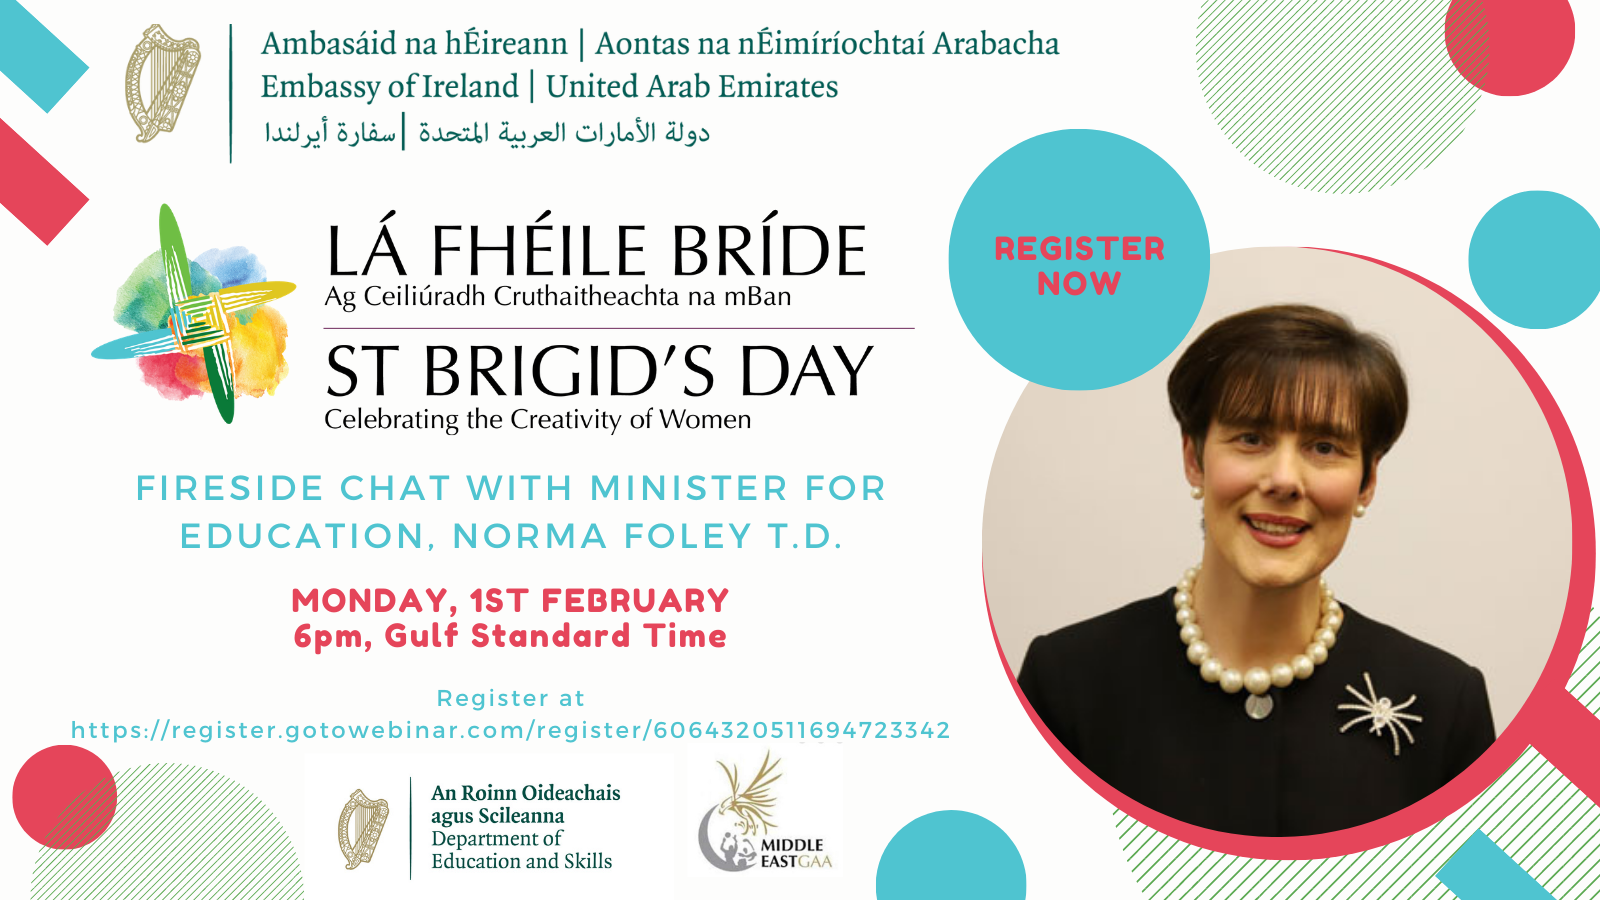 St. Brigid’s Day Fireside Chat with Minister for Education, Norma Foley T.D.